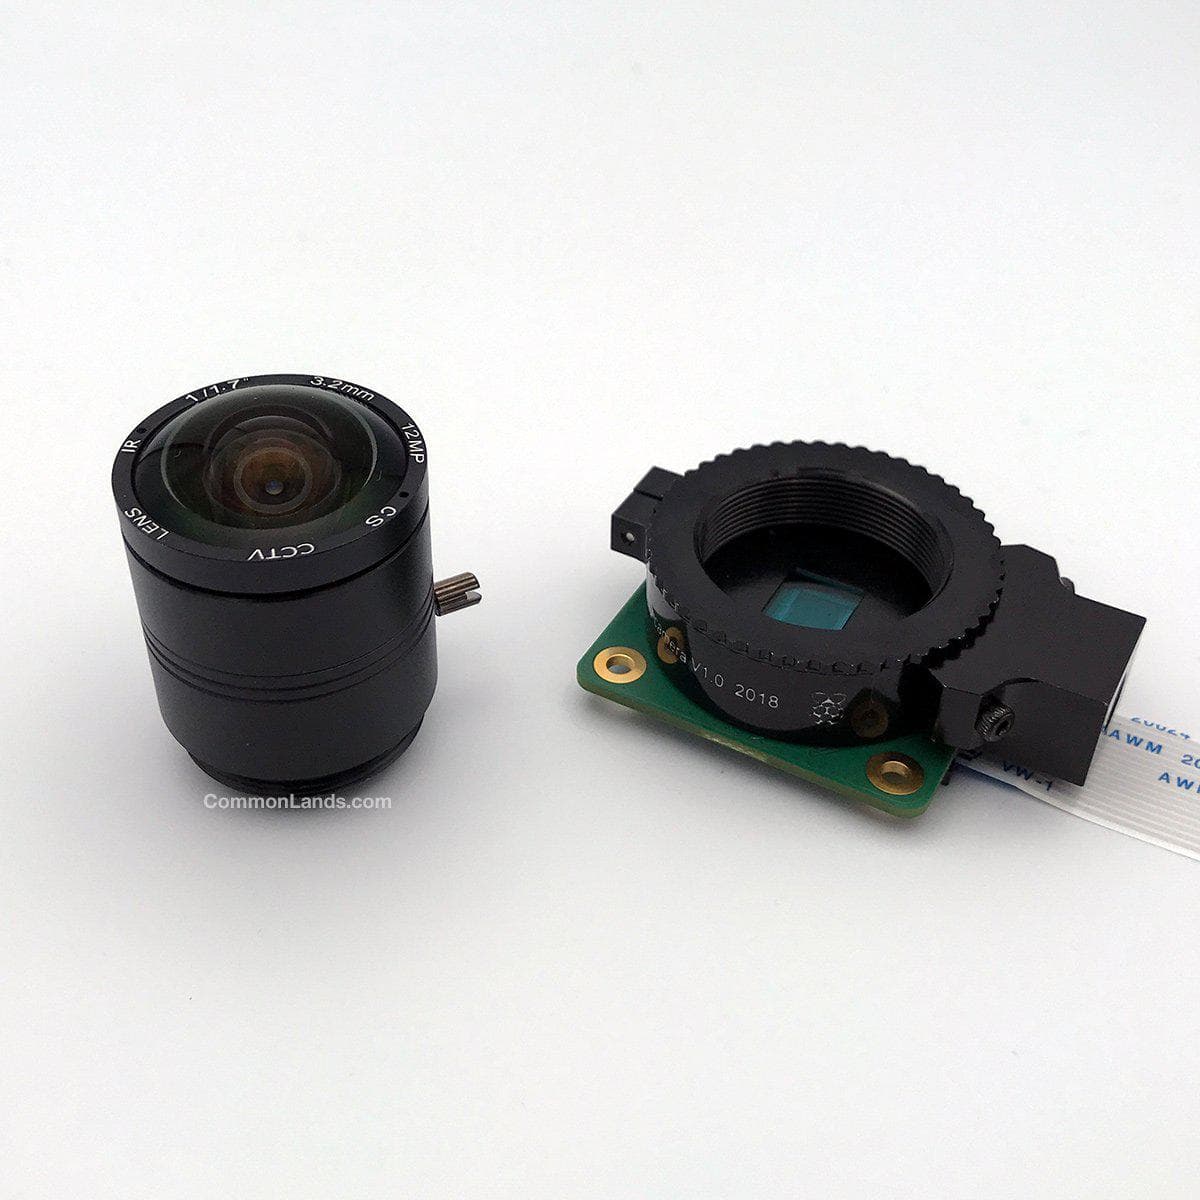 The CommonLands CIL03.2-F1.8-CSNOIR 3.2mm EFL lens is pictured next to the Raspberry Pi HQ Camera.